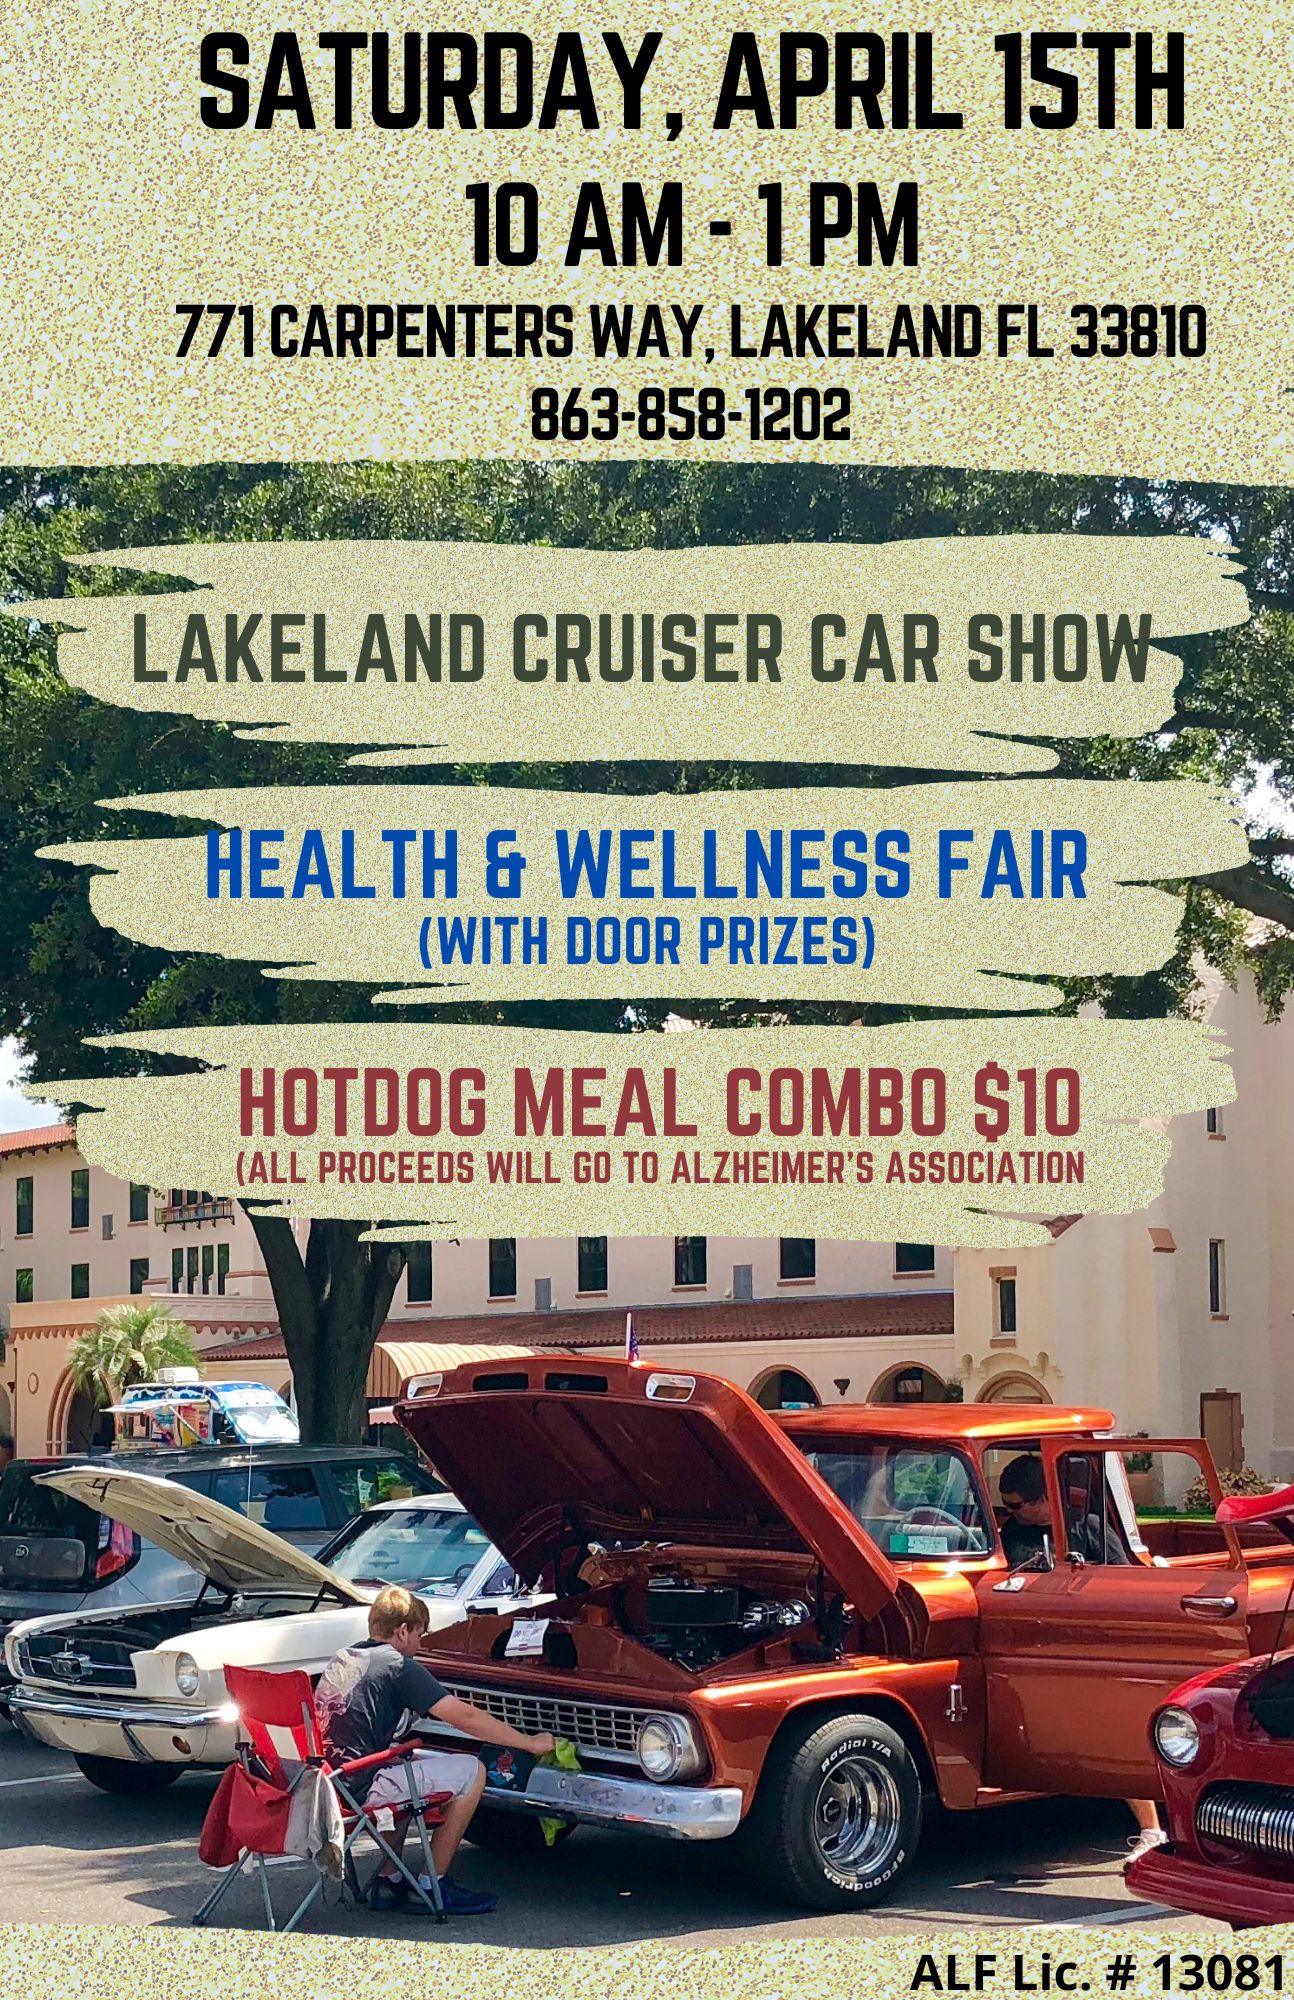 Lakeland Cruiser Car Show, Health and Wellness Fair with giveaways and Hotdogs combo $10 for Alzheimer's Association fundraiser.